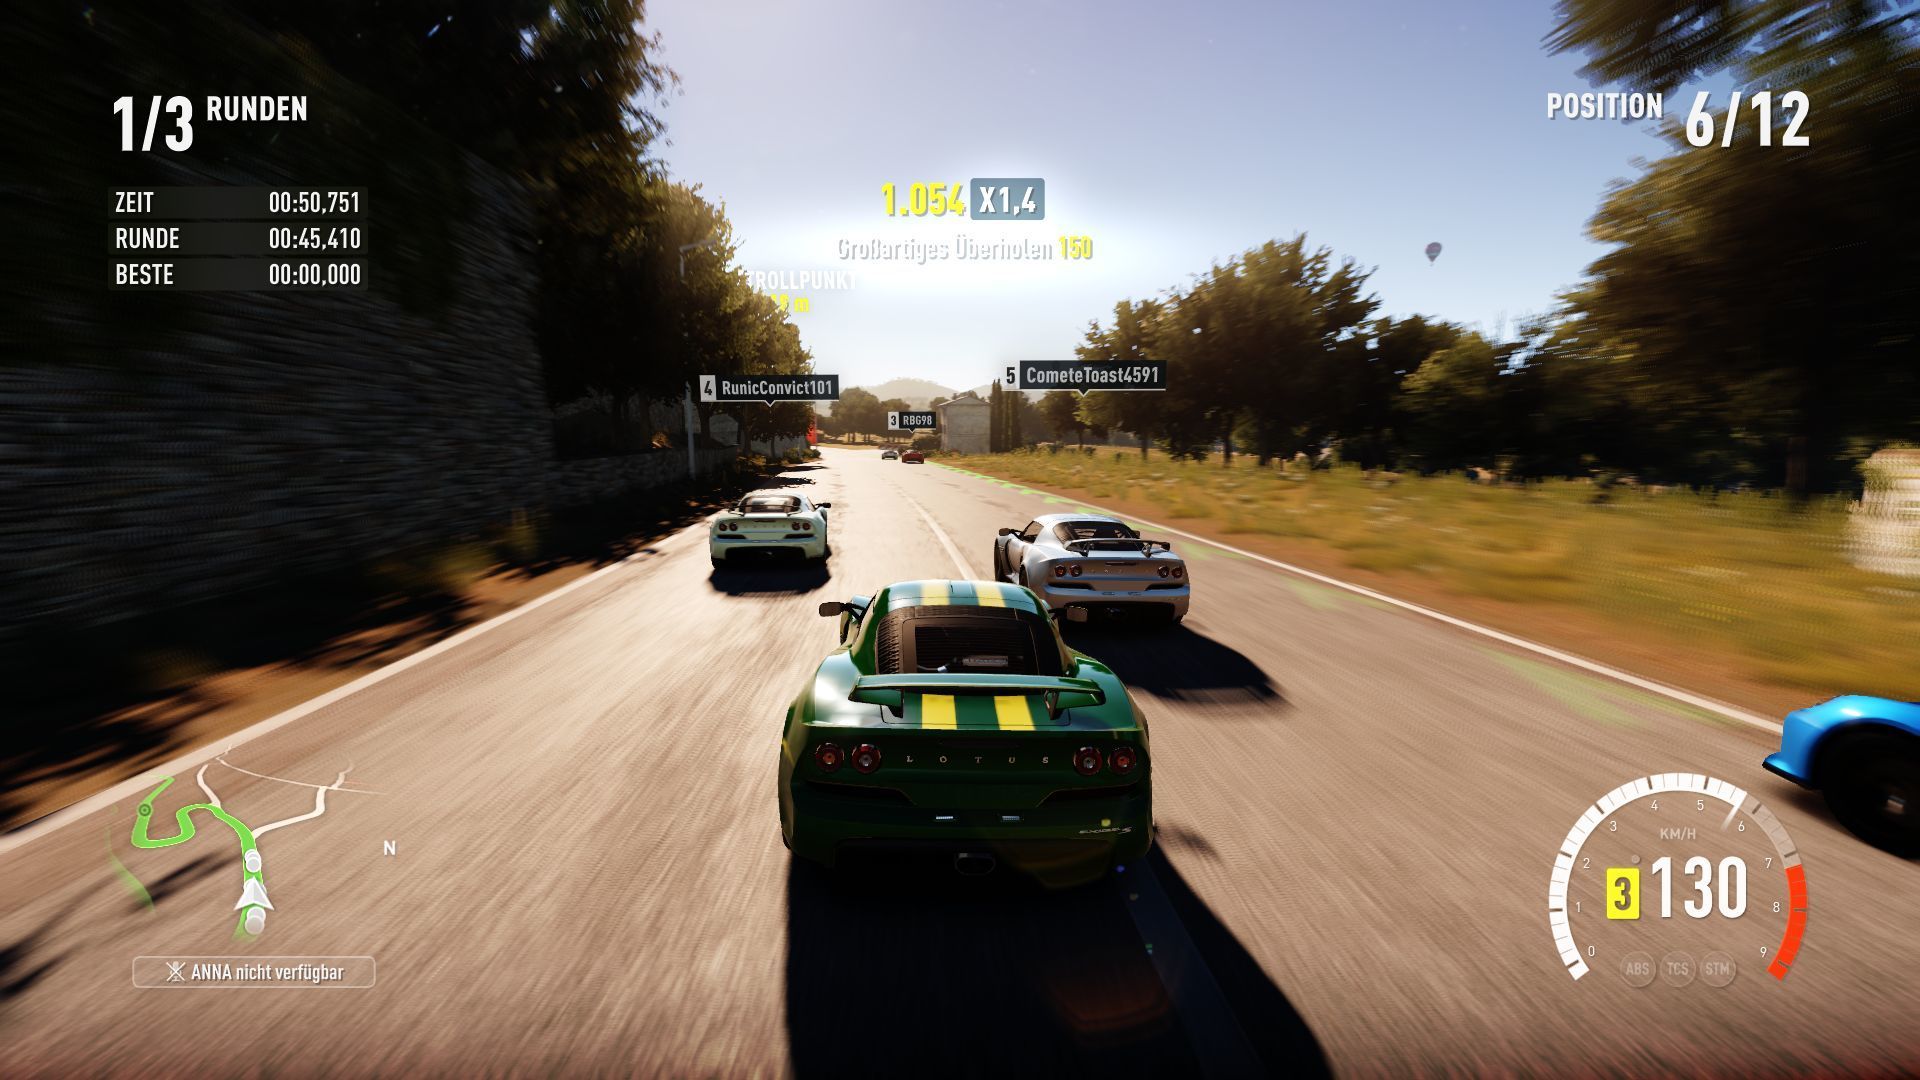 Screenshot of Forza Motorsport 5 (Xbox One, 2013) - MobyGames